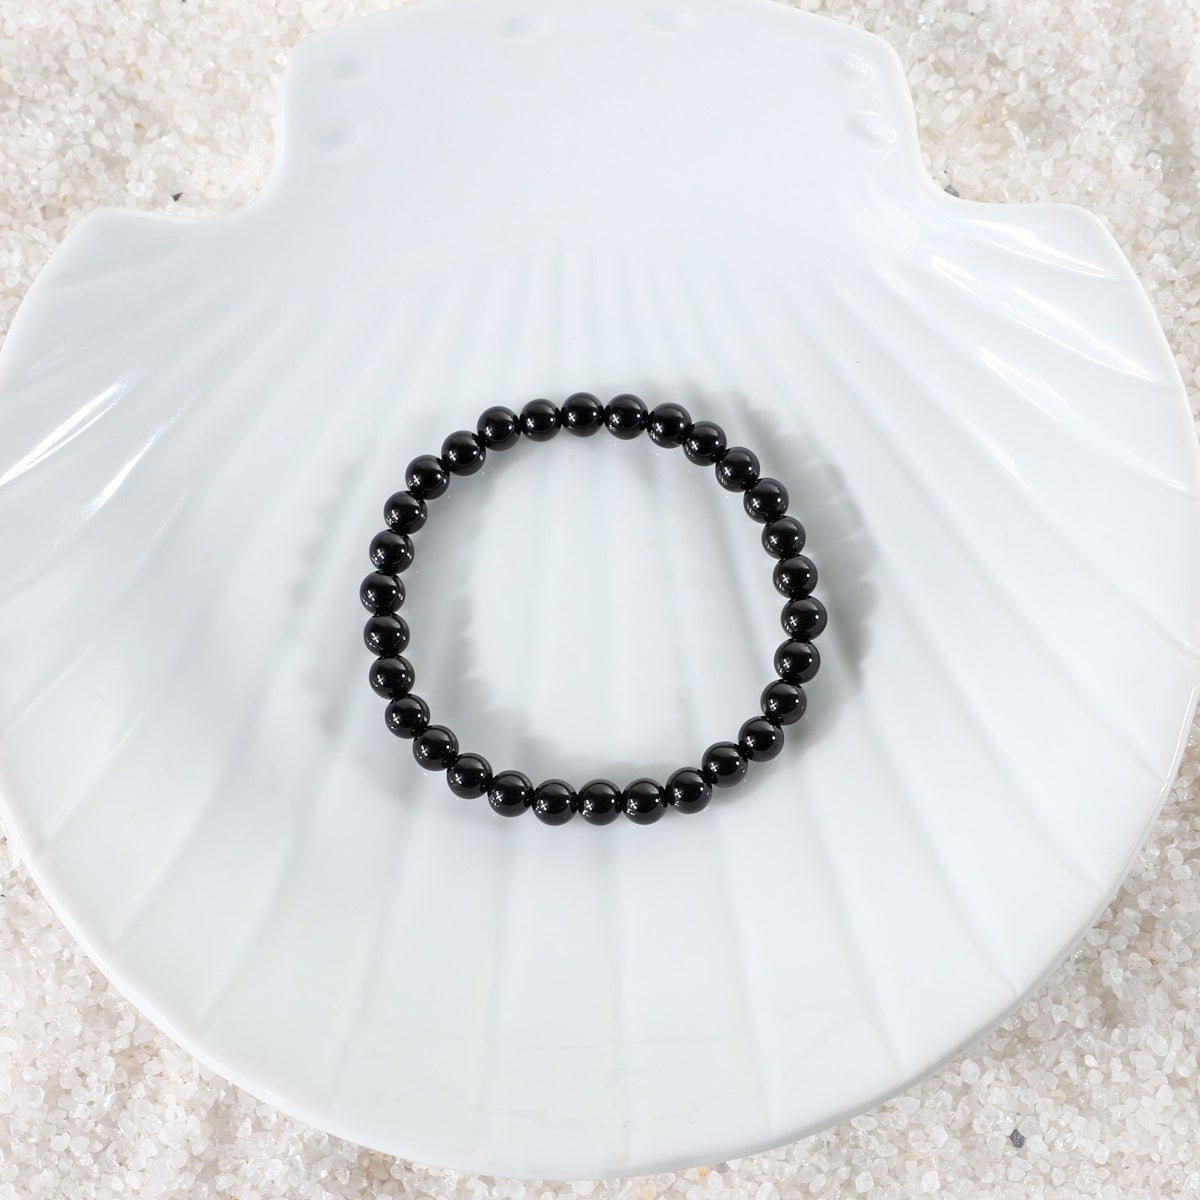 Chic packaging of the Black Onyx Bracelet, ready to be unwrapped and adorned, making it a perfect gift or personal accessory